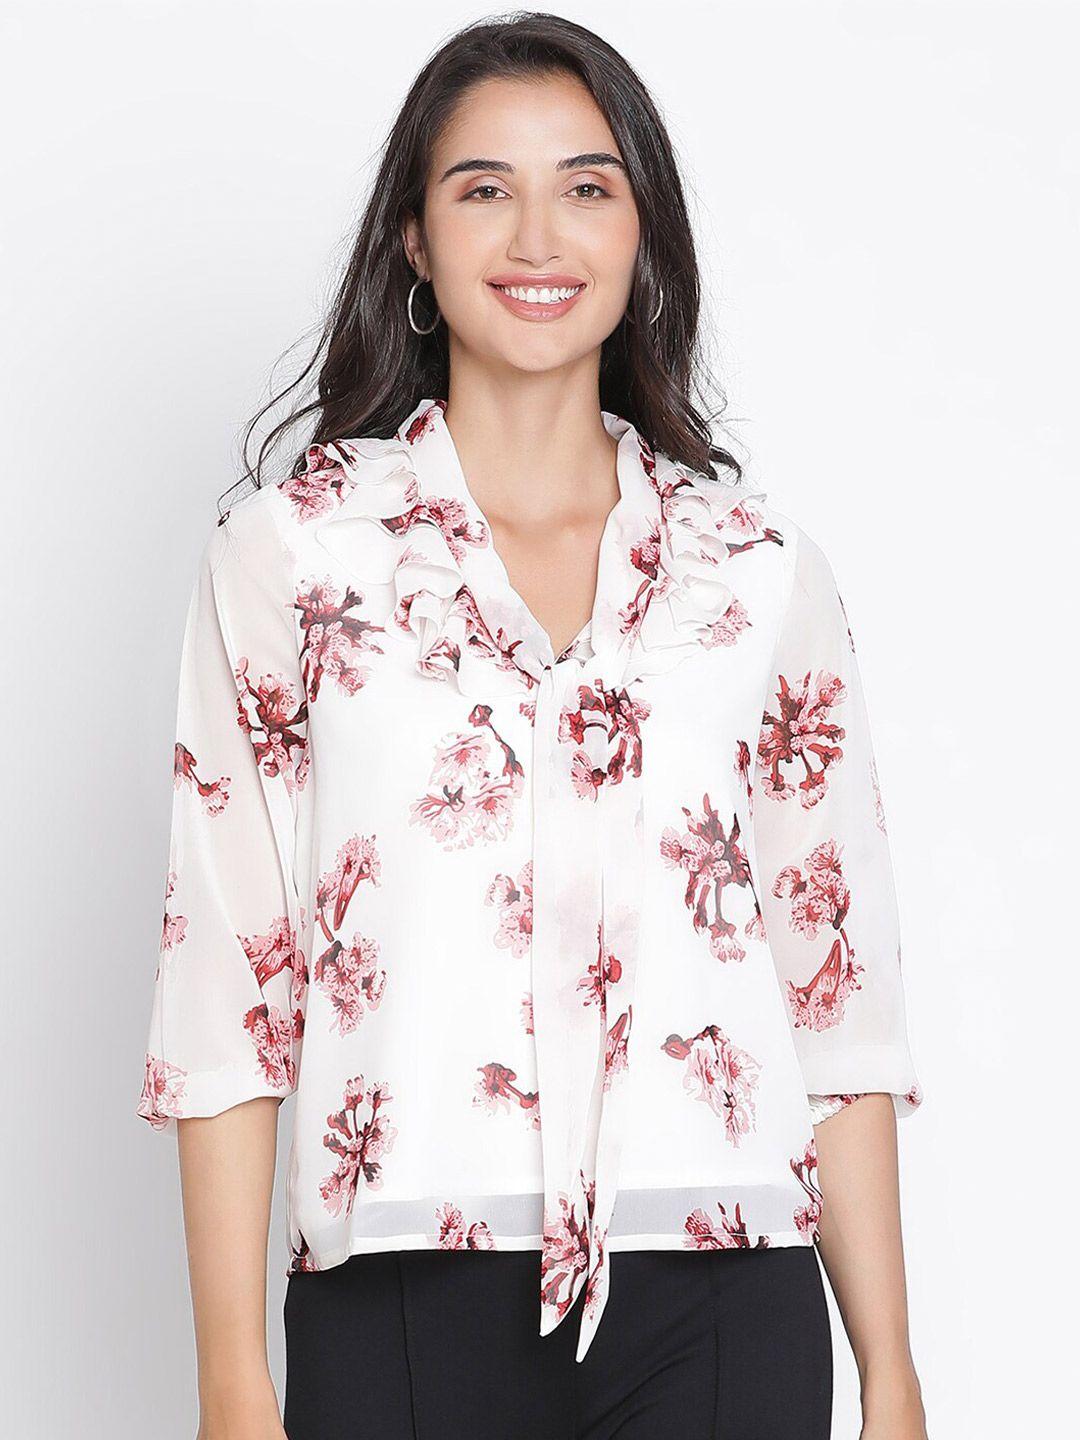 draax fashions floral printed tie-up neck roll-up sleeves crepe top